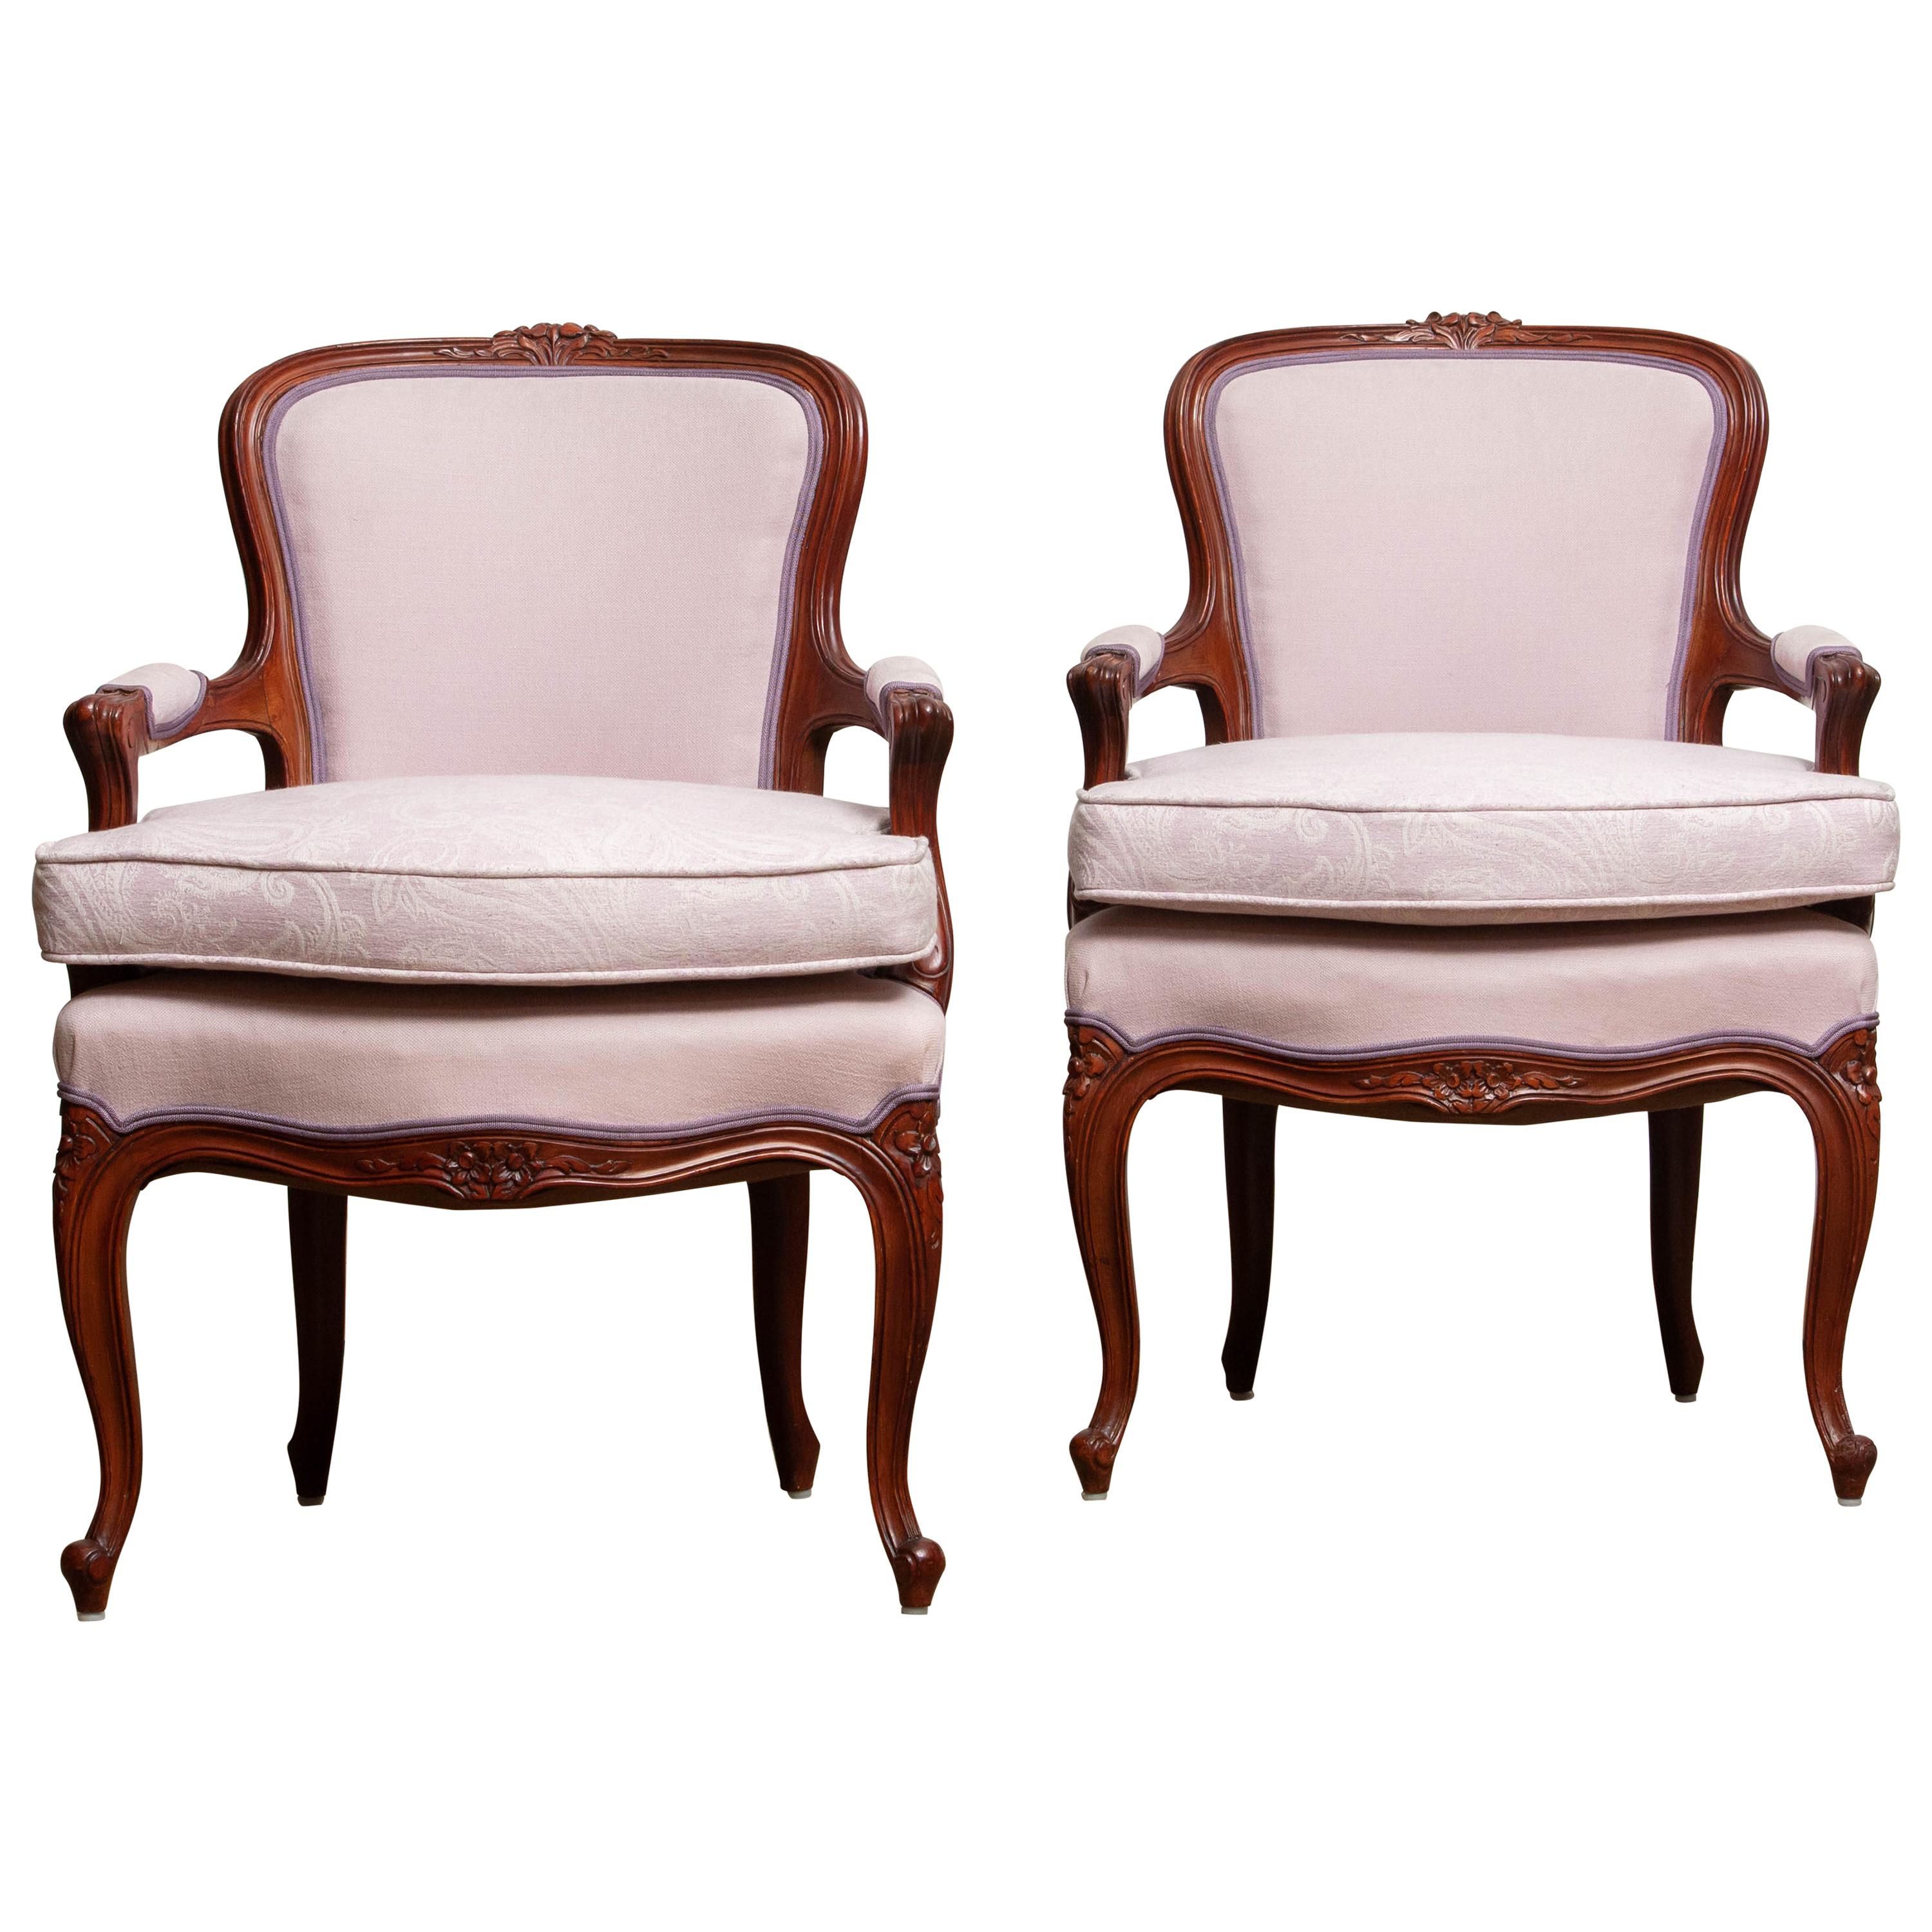 Mid-20th Century 1950s, Pair of Pink Swedish Rococo Bergères in the Shabby Chic Technique Chairs